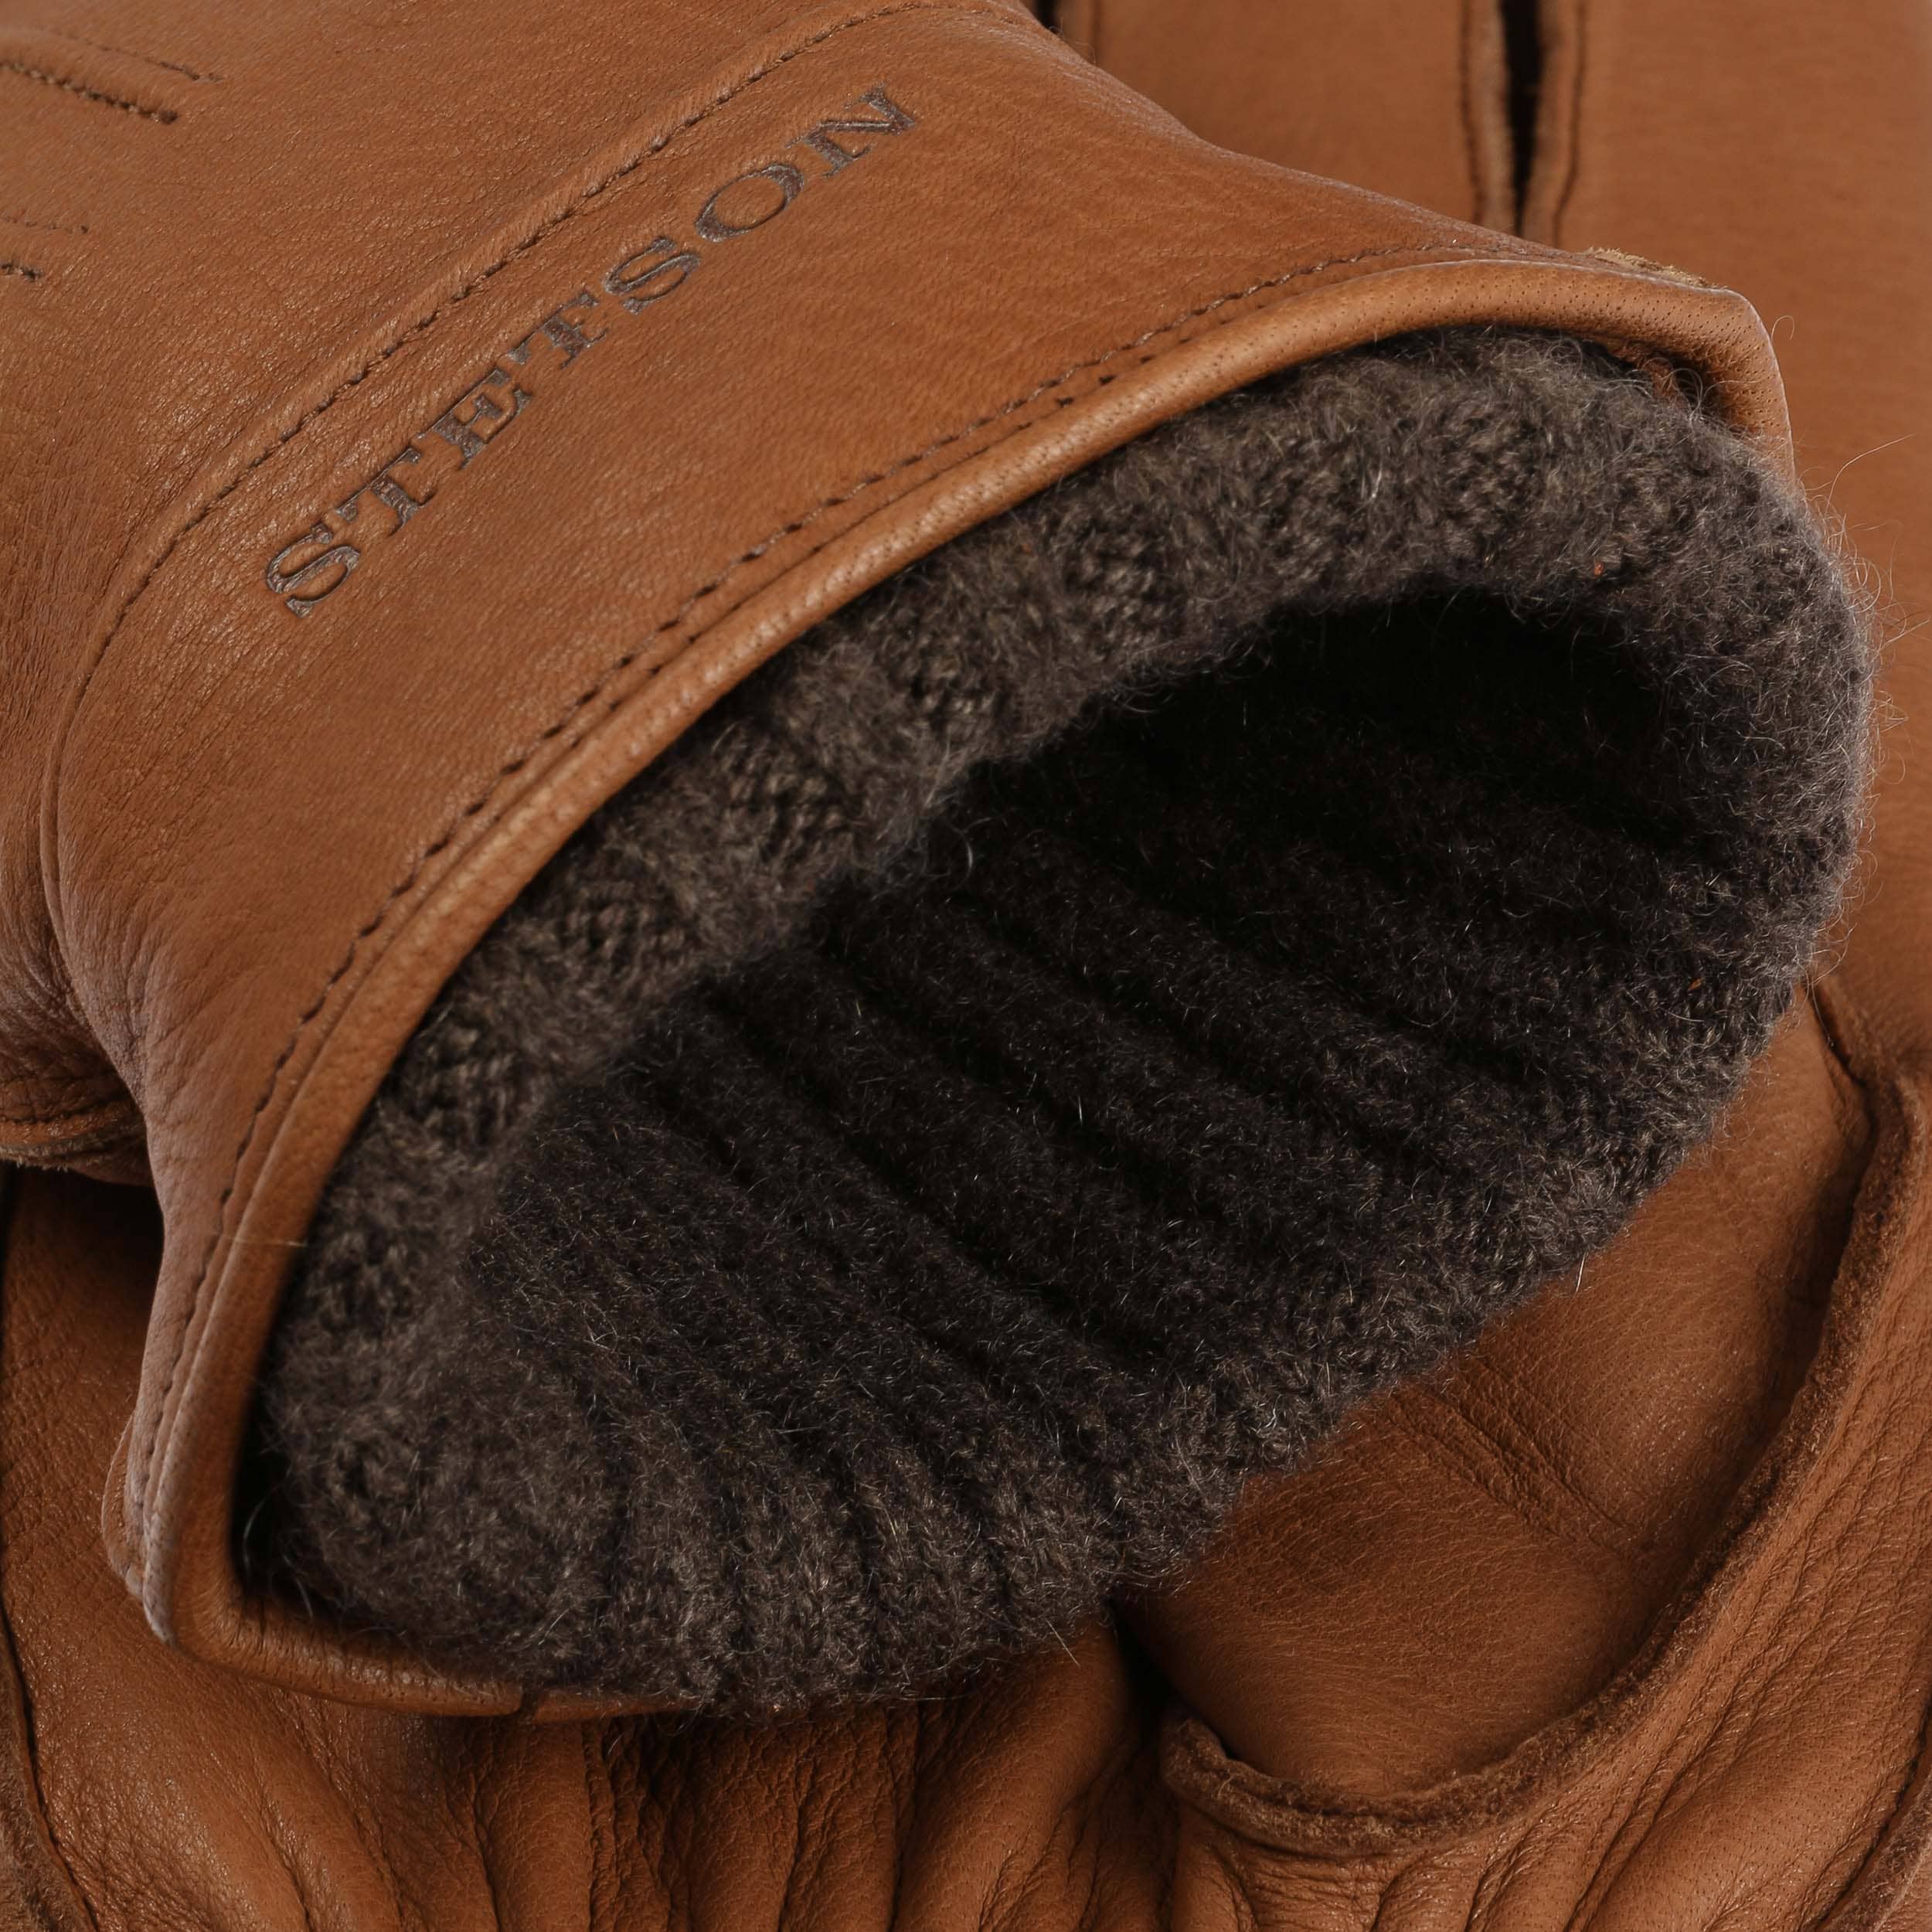 Guanti in Pelle Deer Cashmere by Stetson - 149,00 €